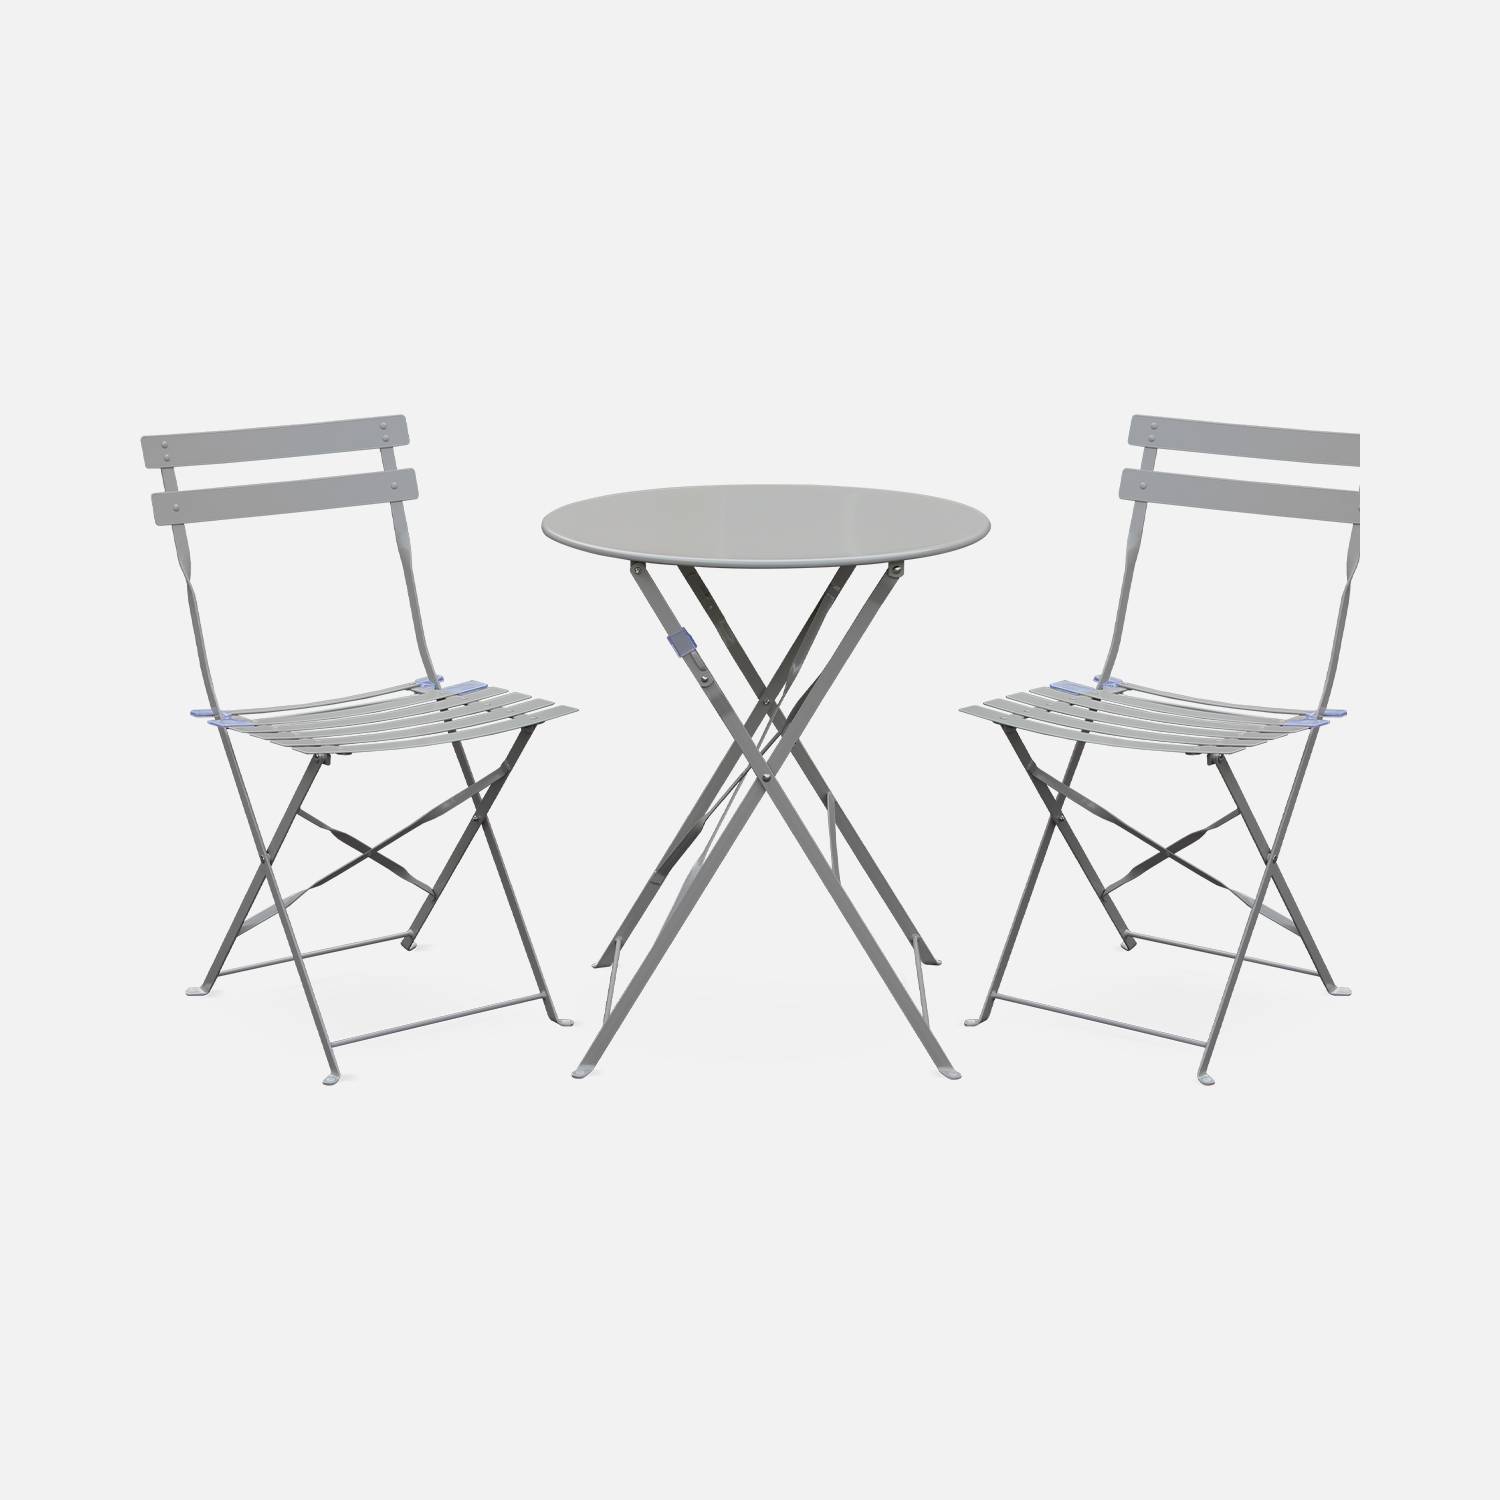 2-seater foldable thermo-lacquered steel bistro garden table with chairs, Ø60cm, Taupe grey | sweeek